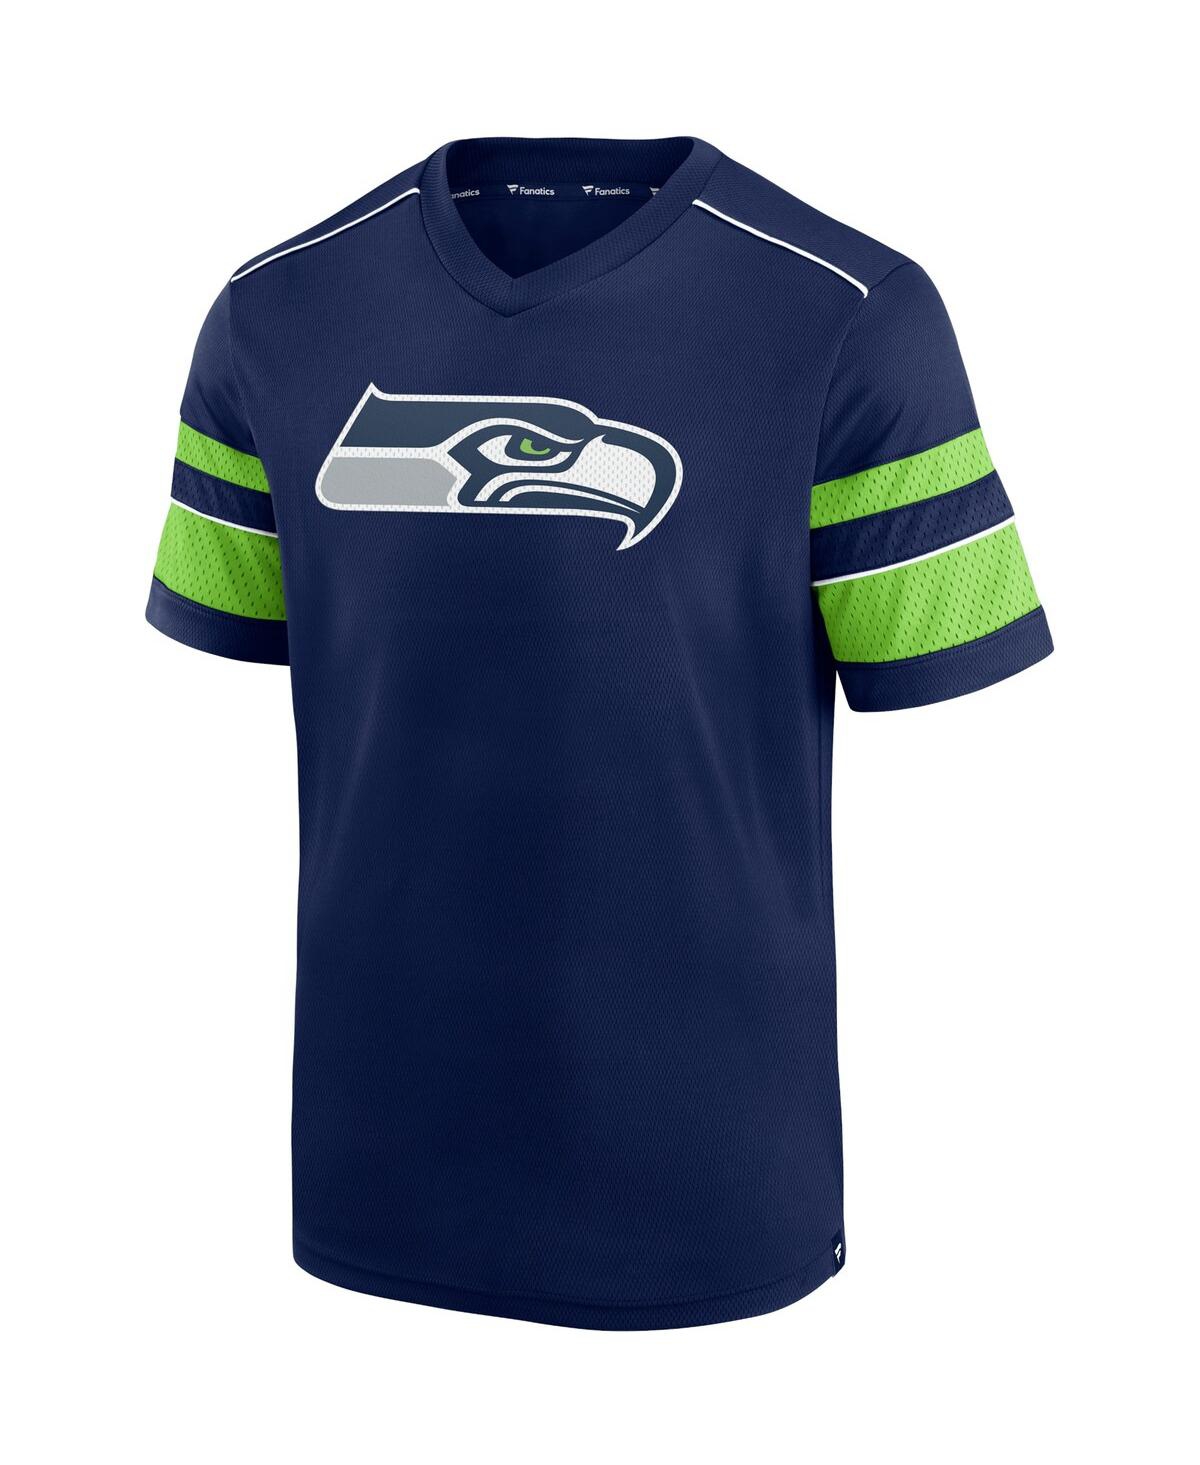 Shop Fanatics Men's  Dk Metcalf College Navy Seattle Seahawks Hashmark Name And Number V-neck T-shirt